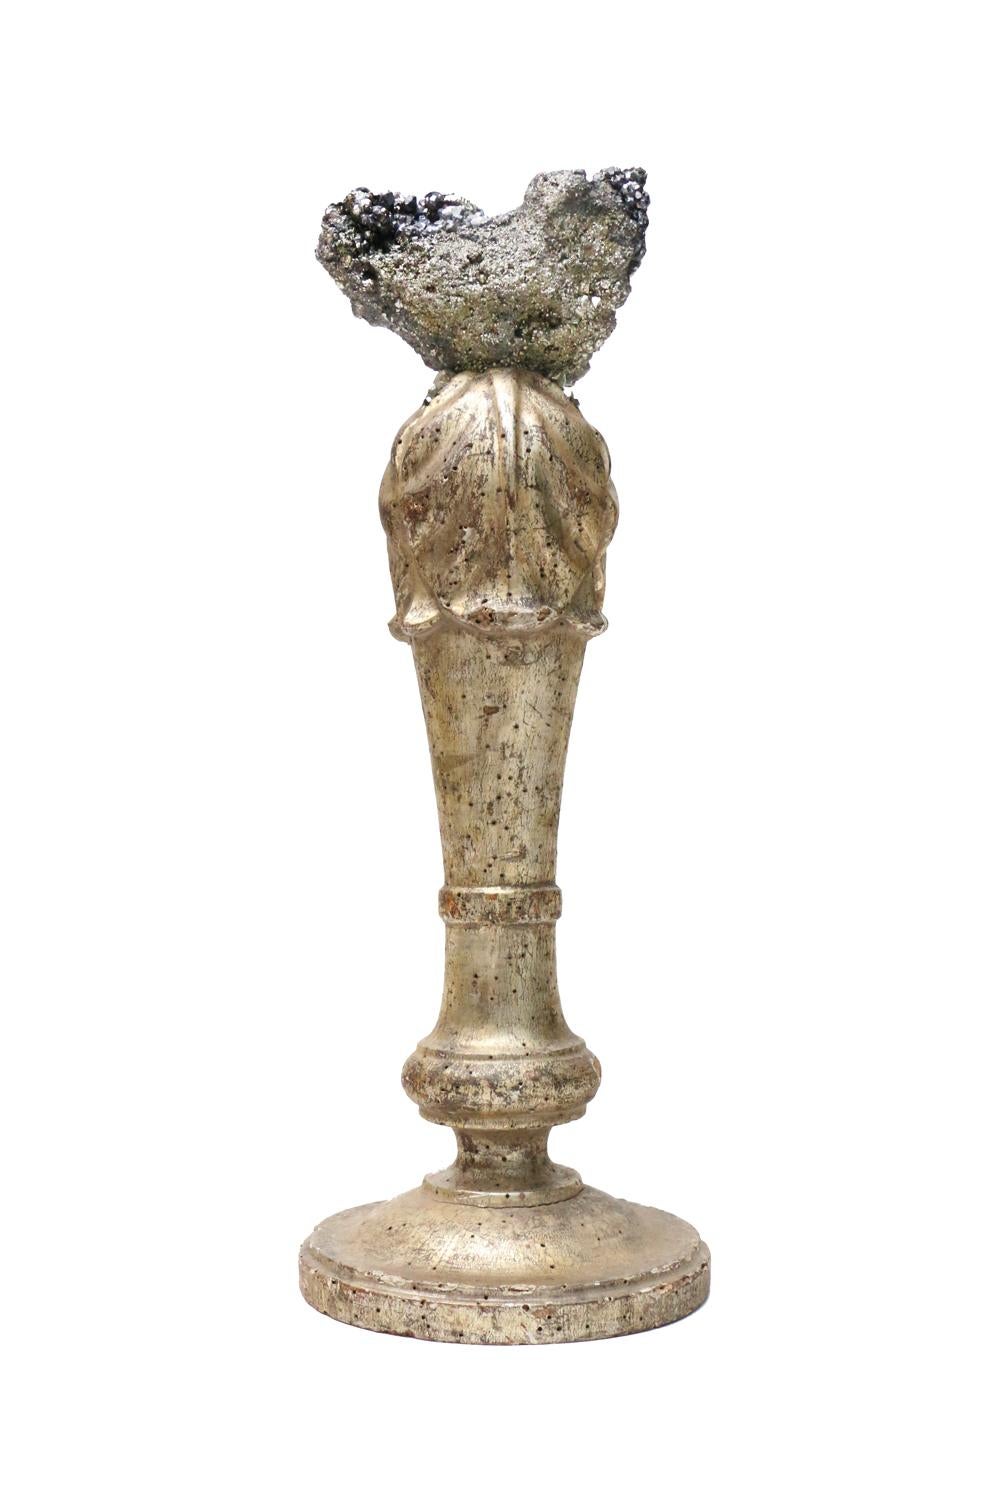 Sculptural 18th century Italian candlestick mounted with galena and pyrite deposits.

The gilded fragment was originally part of a candlestick in a historical Italian church in Italy. It is mounted with the coordinating galena and pyrite which is a